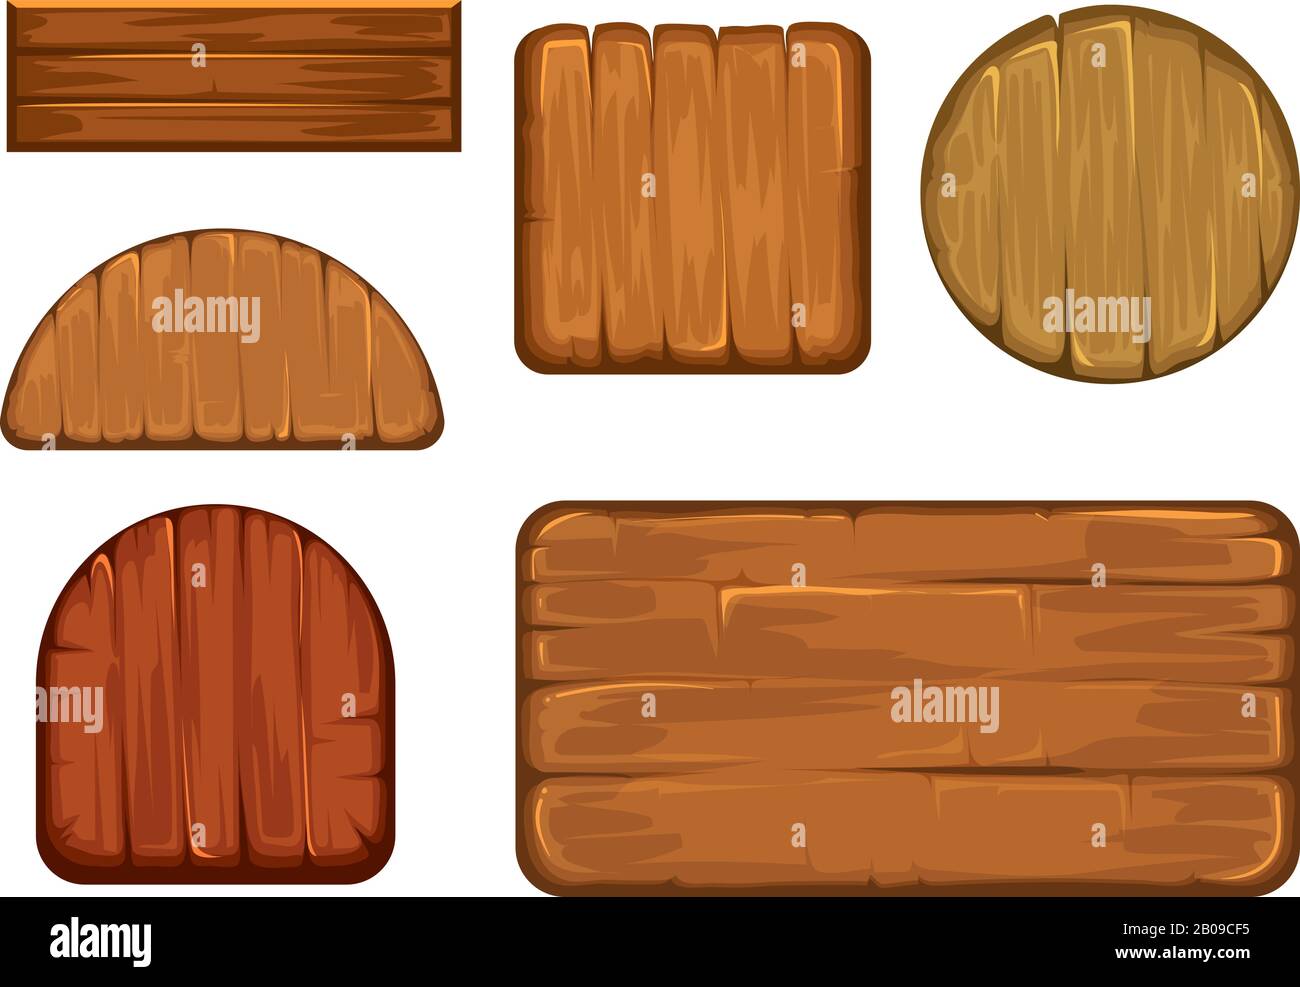 Wooden retro labels vector set. Different shapes of wood sign board. Plank frame and timbered board vector illustration Stock Vector